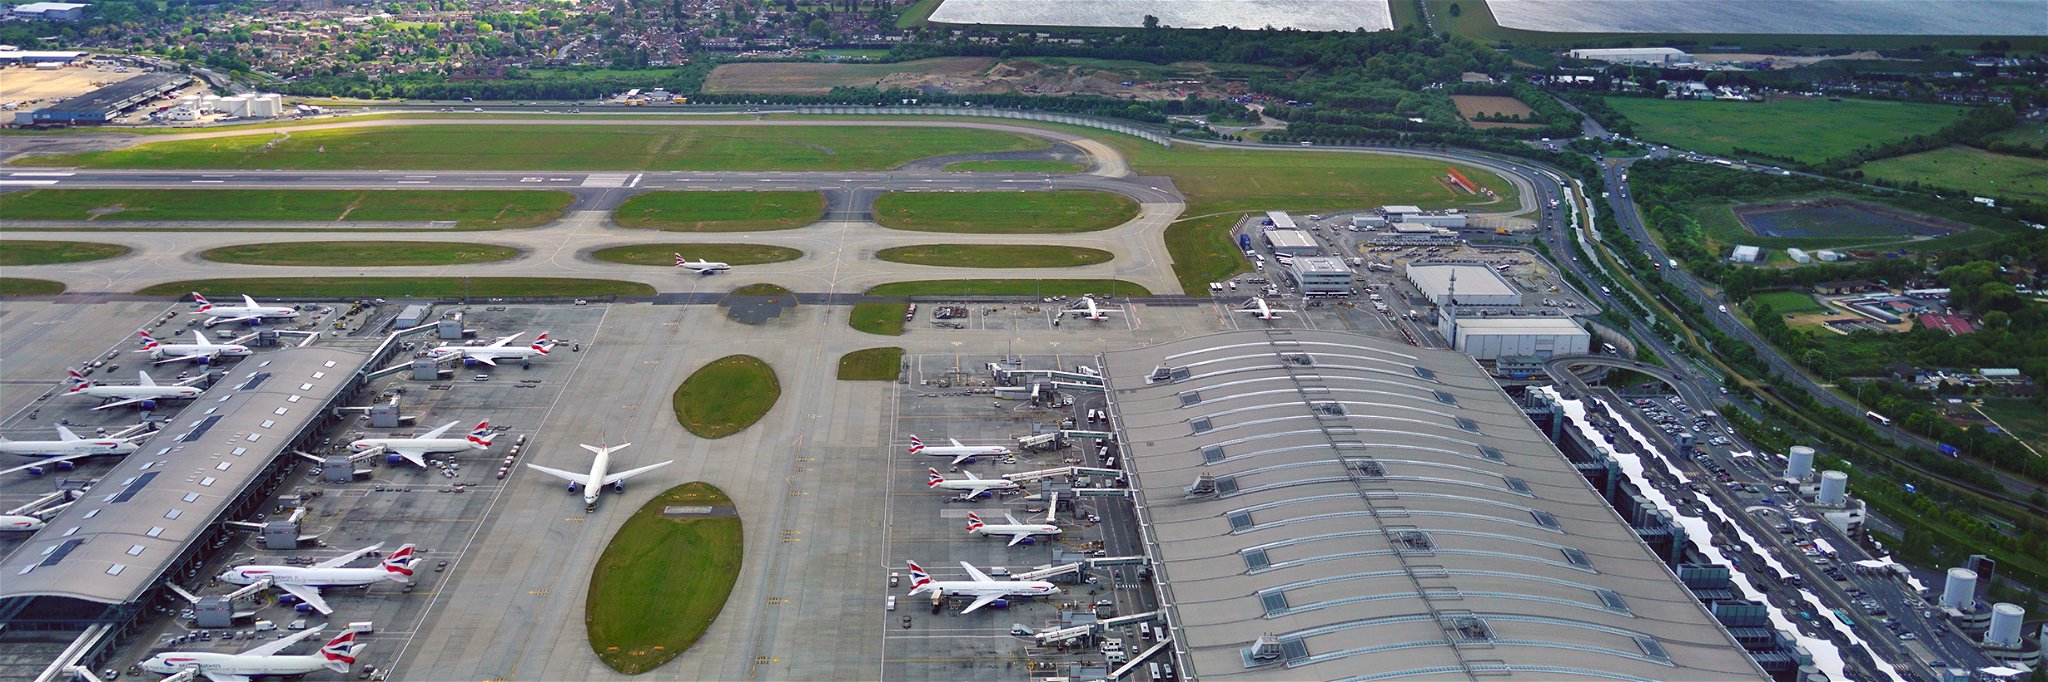 View of airplanes from British Airways (BA) at the Terminal 5 at London Heathrow Airport.